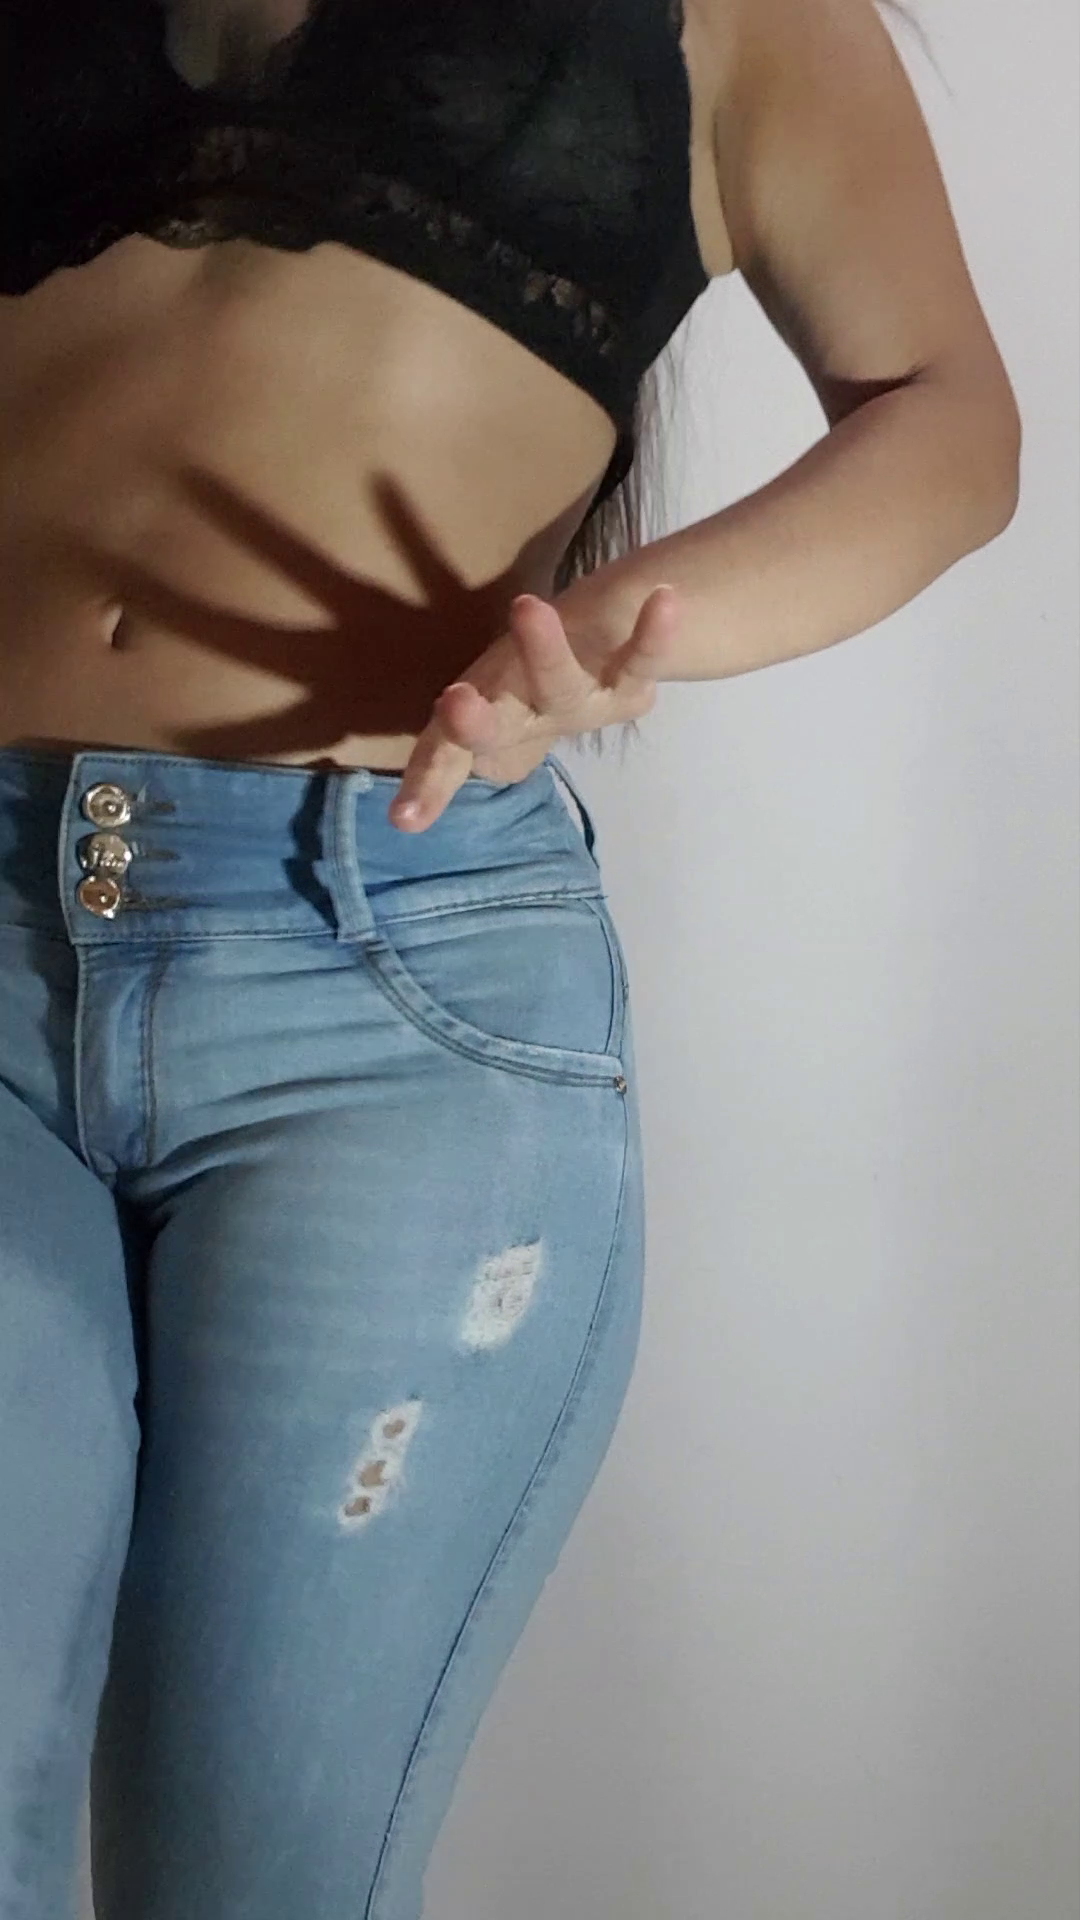 Watch the Video by Viiky with the username @Viiky, posted on June 18, 2020. The post is about the topic Video & Gif. and the text says 'Good night everybody. Wating for anal sex'